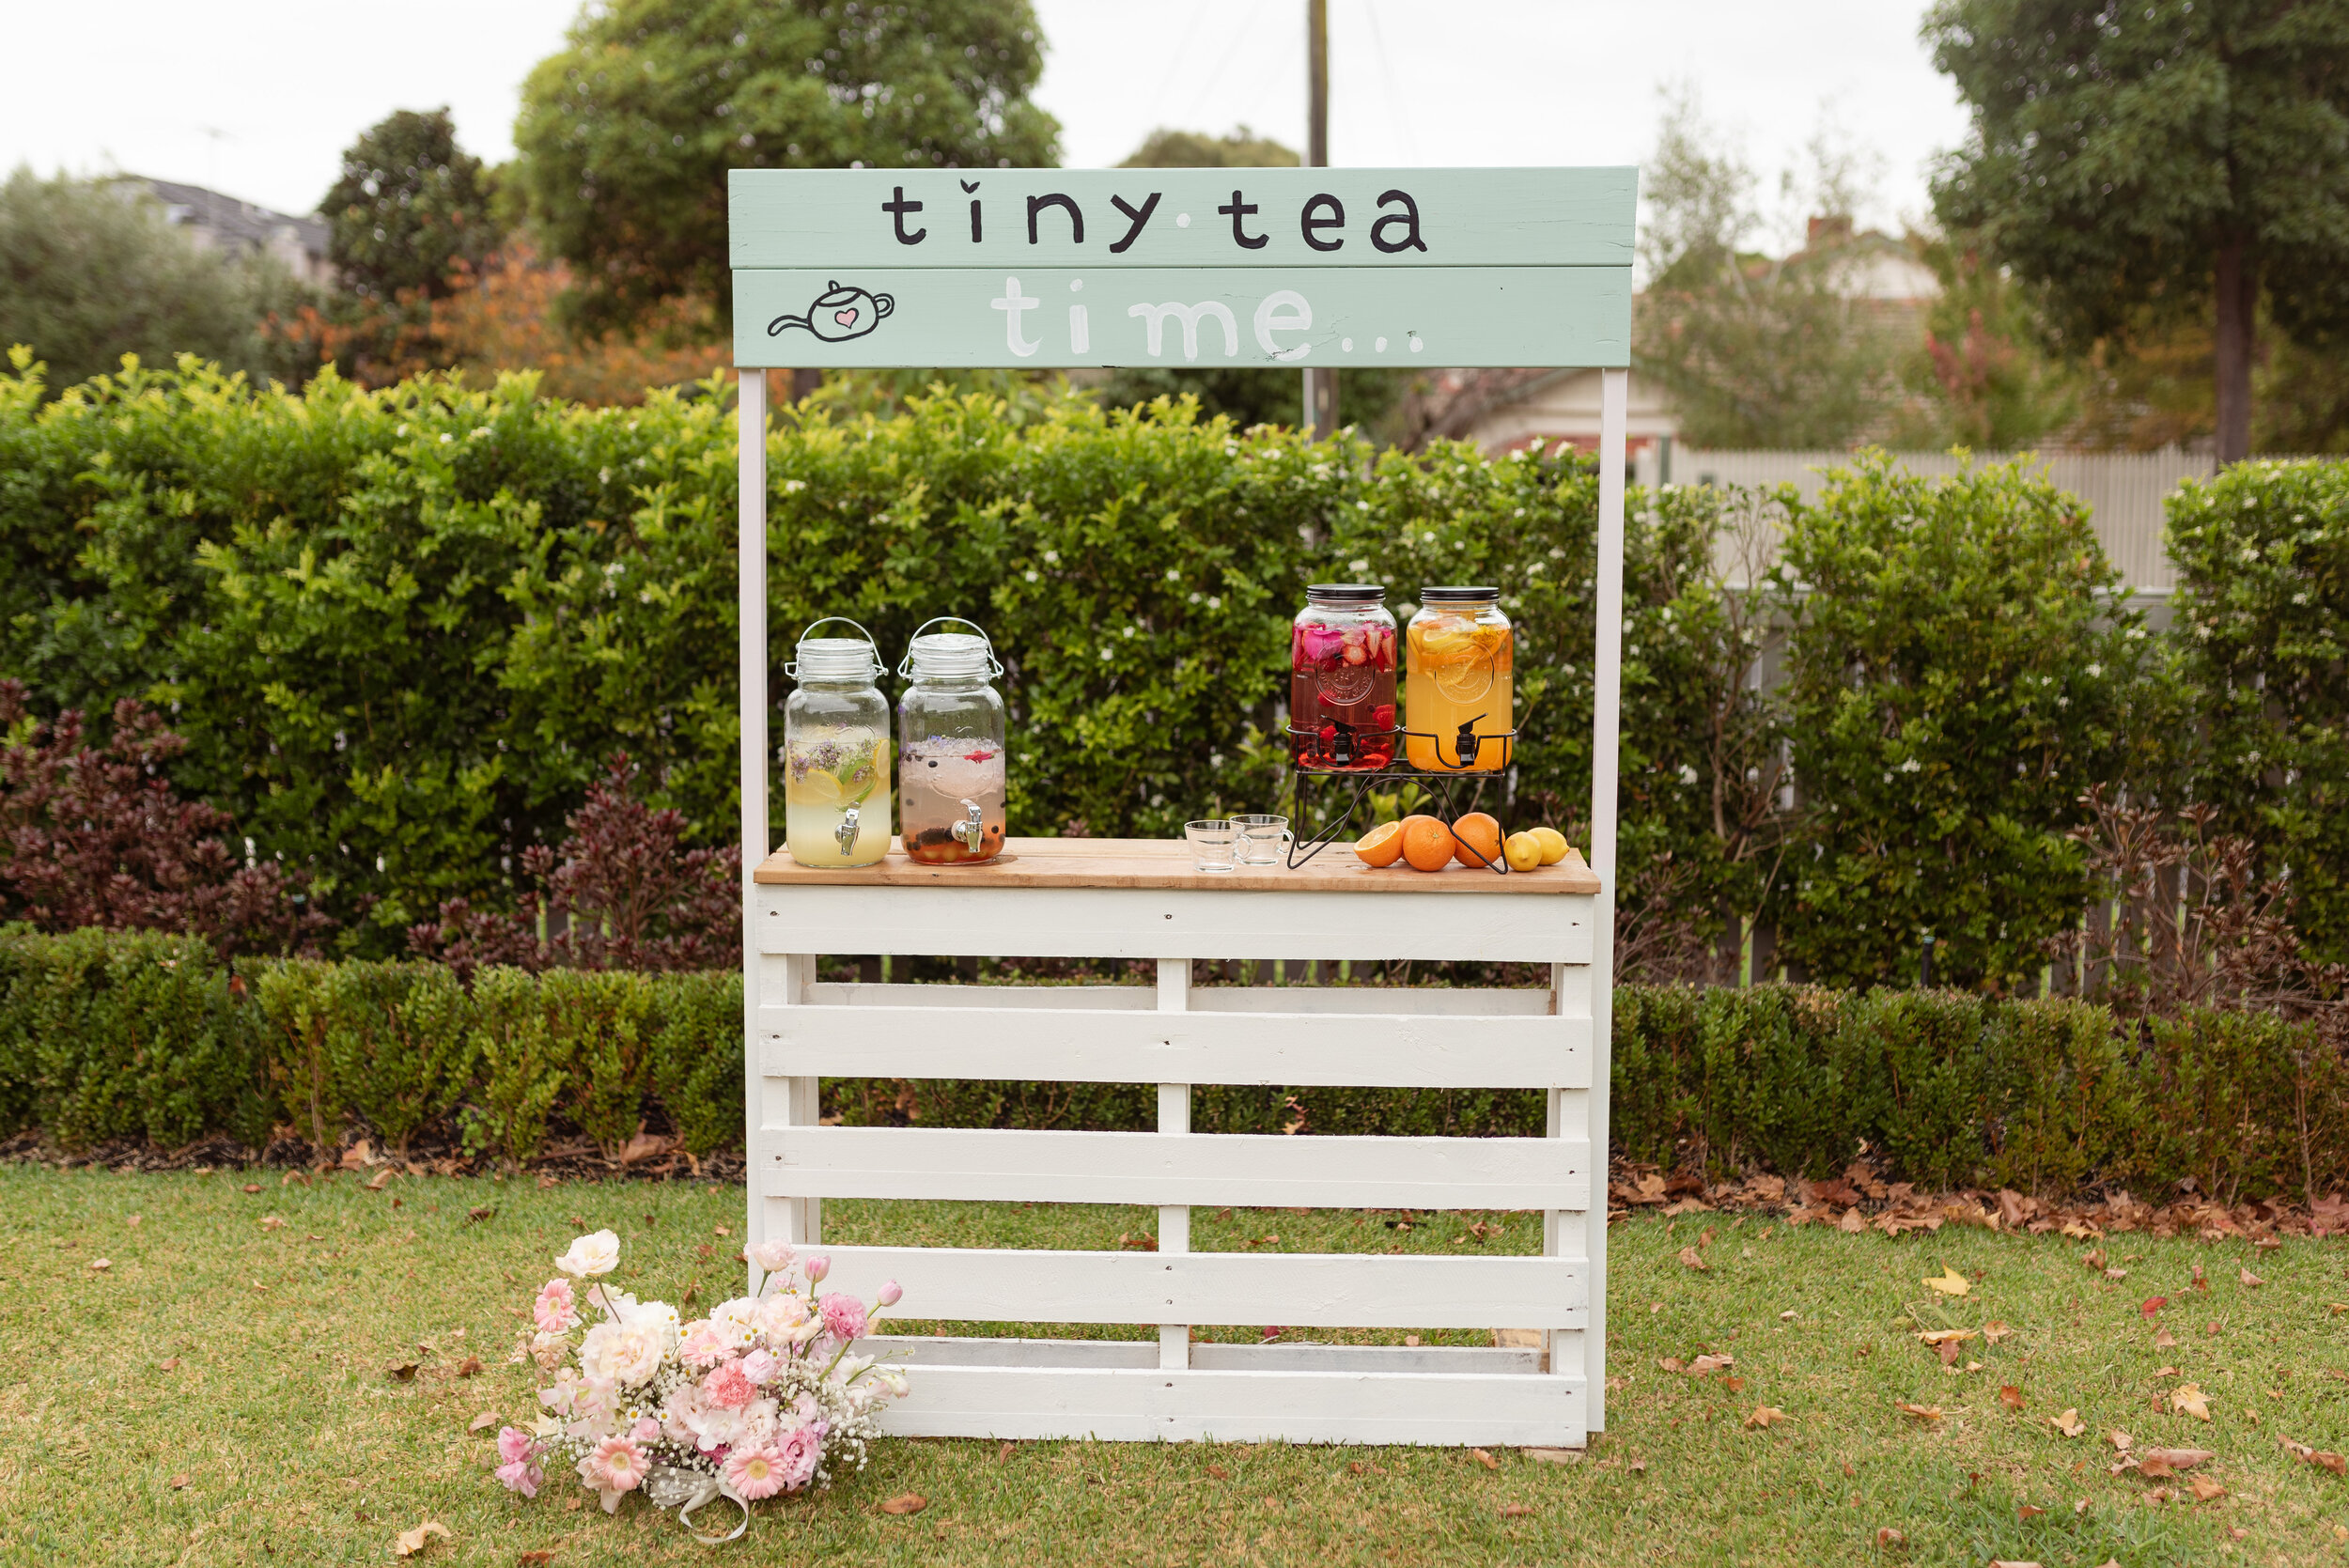 A drinks stand in a garden, sittong on green grass with pink and white florals at the foot of the stand. The sign above the stand reads, "Tiny tea time...". Drinks dispensers full with fruity, colourful tea, with fresh oranges next to them on the table. We were thrilled to be able to provide creative direction for the entire process of the brand shoot, and we worked closely with a number of eco-friendly suppliers to come together and create a delightful shoot for Tiny Tea Kids.